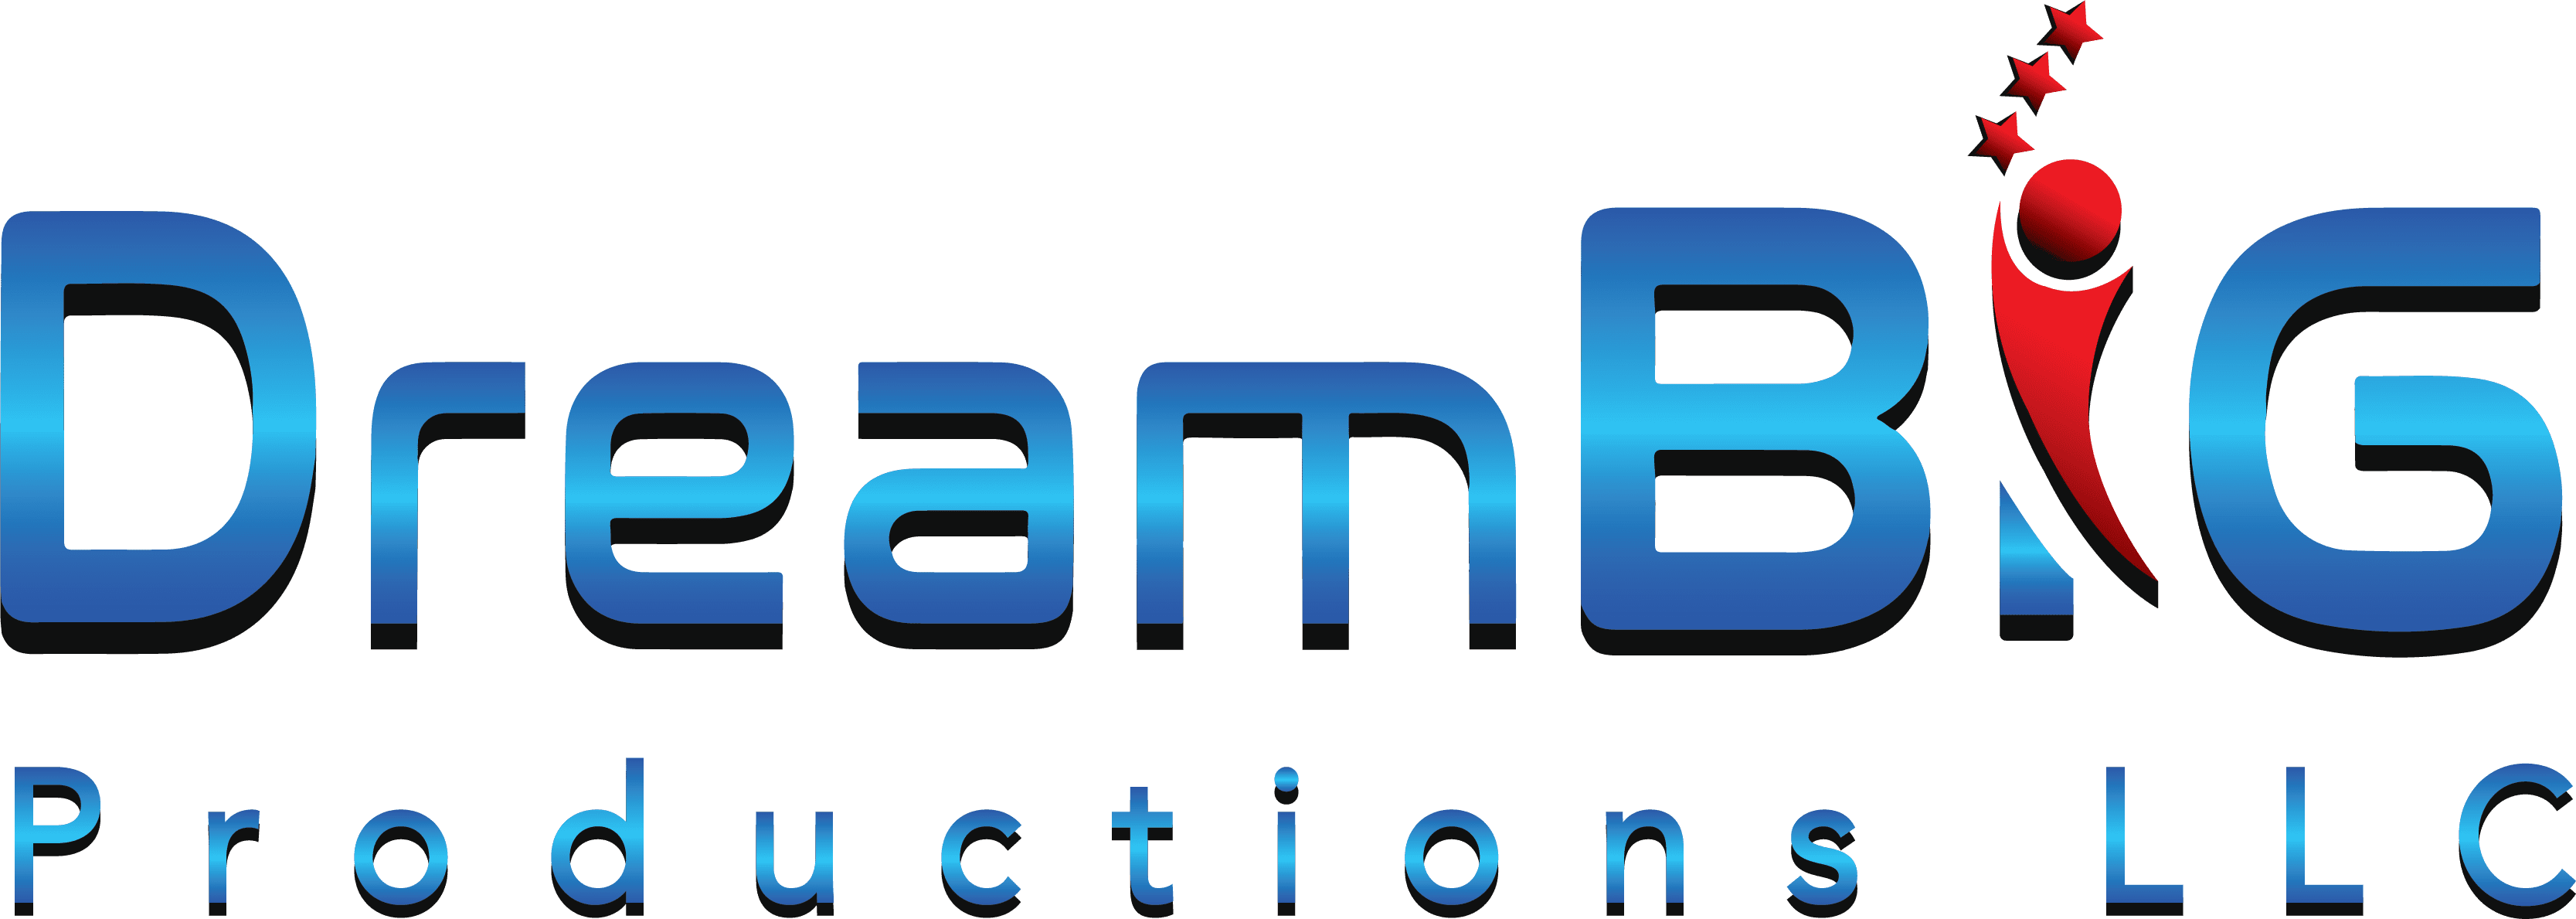 A green background with blue letters that say " team eb action ".